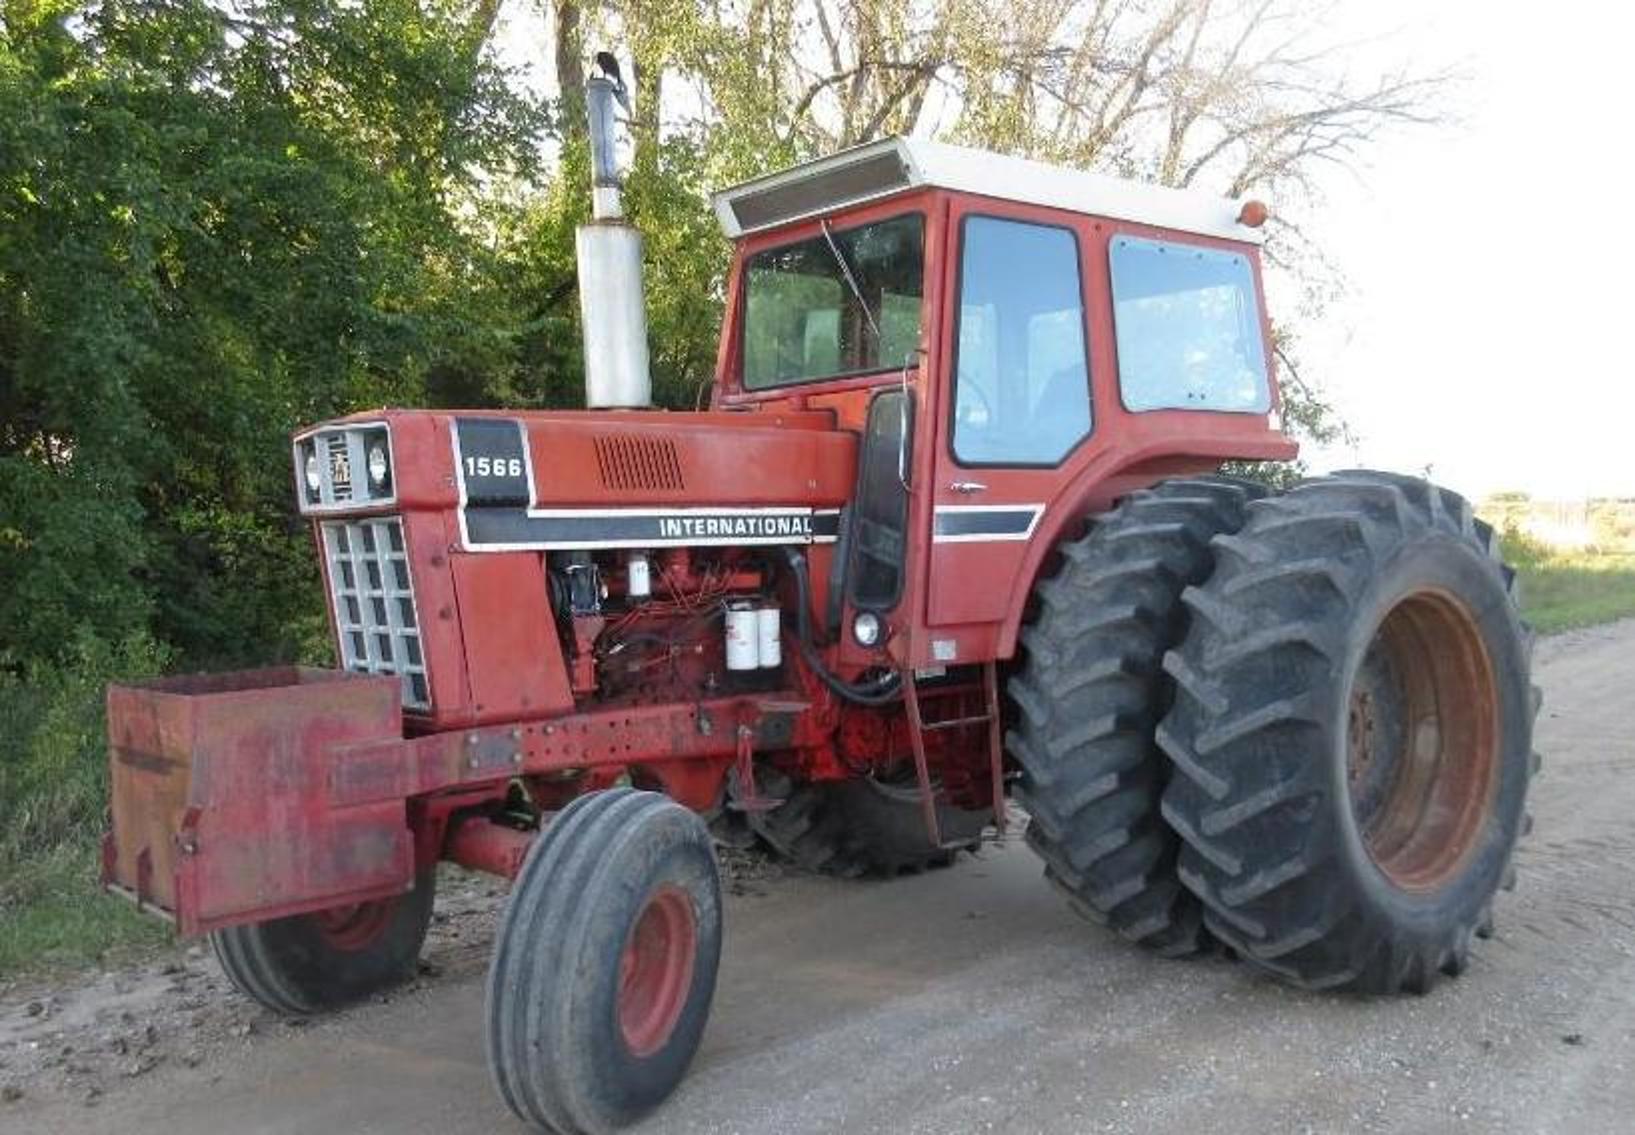 Farm Equipment and More: Paul Ims Estate and Others